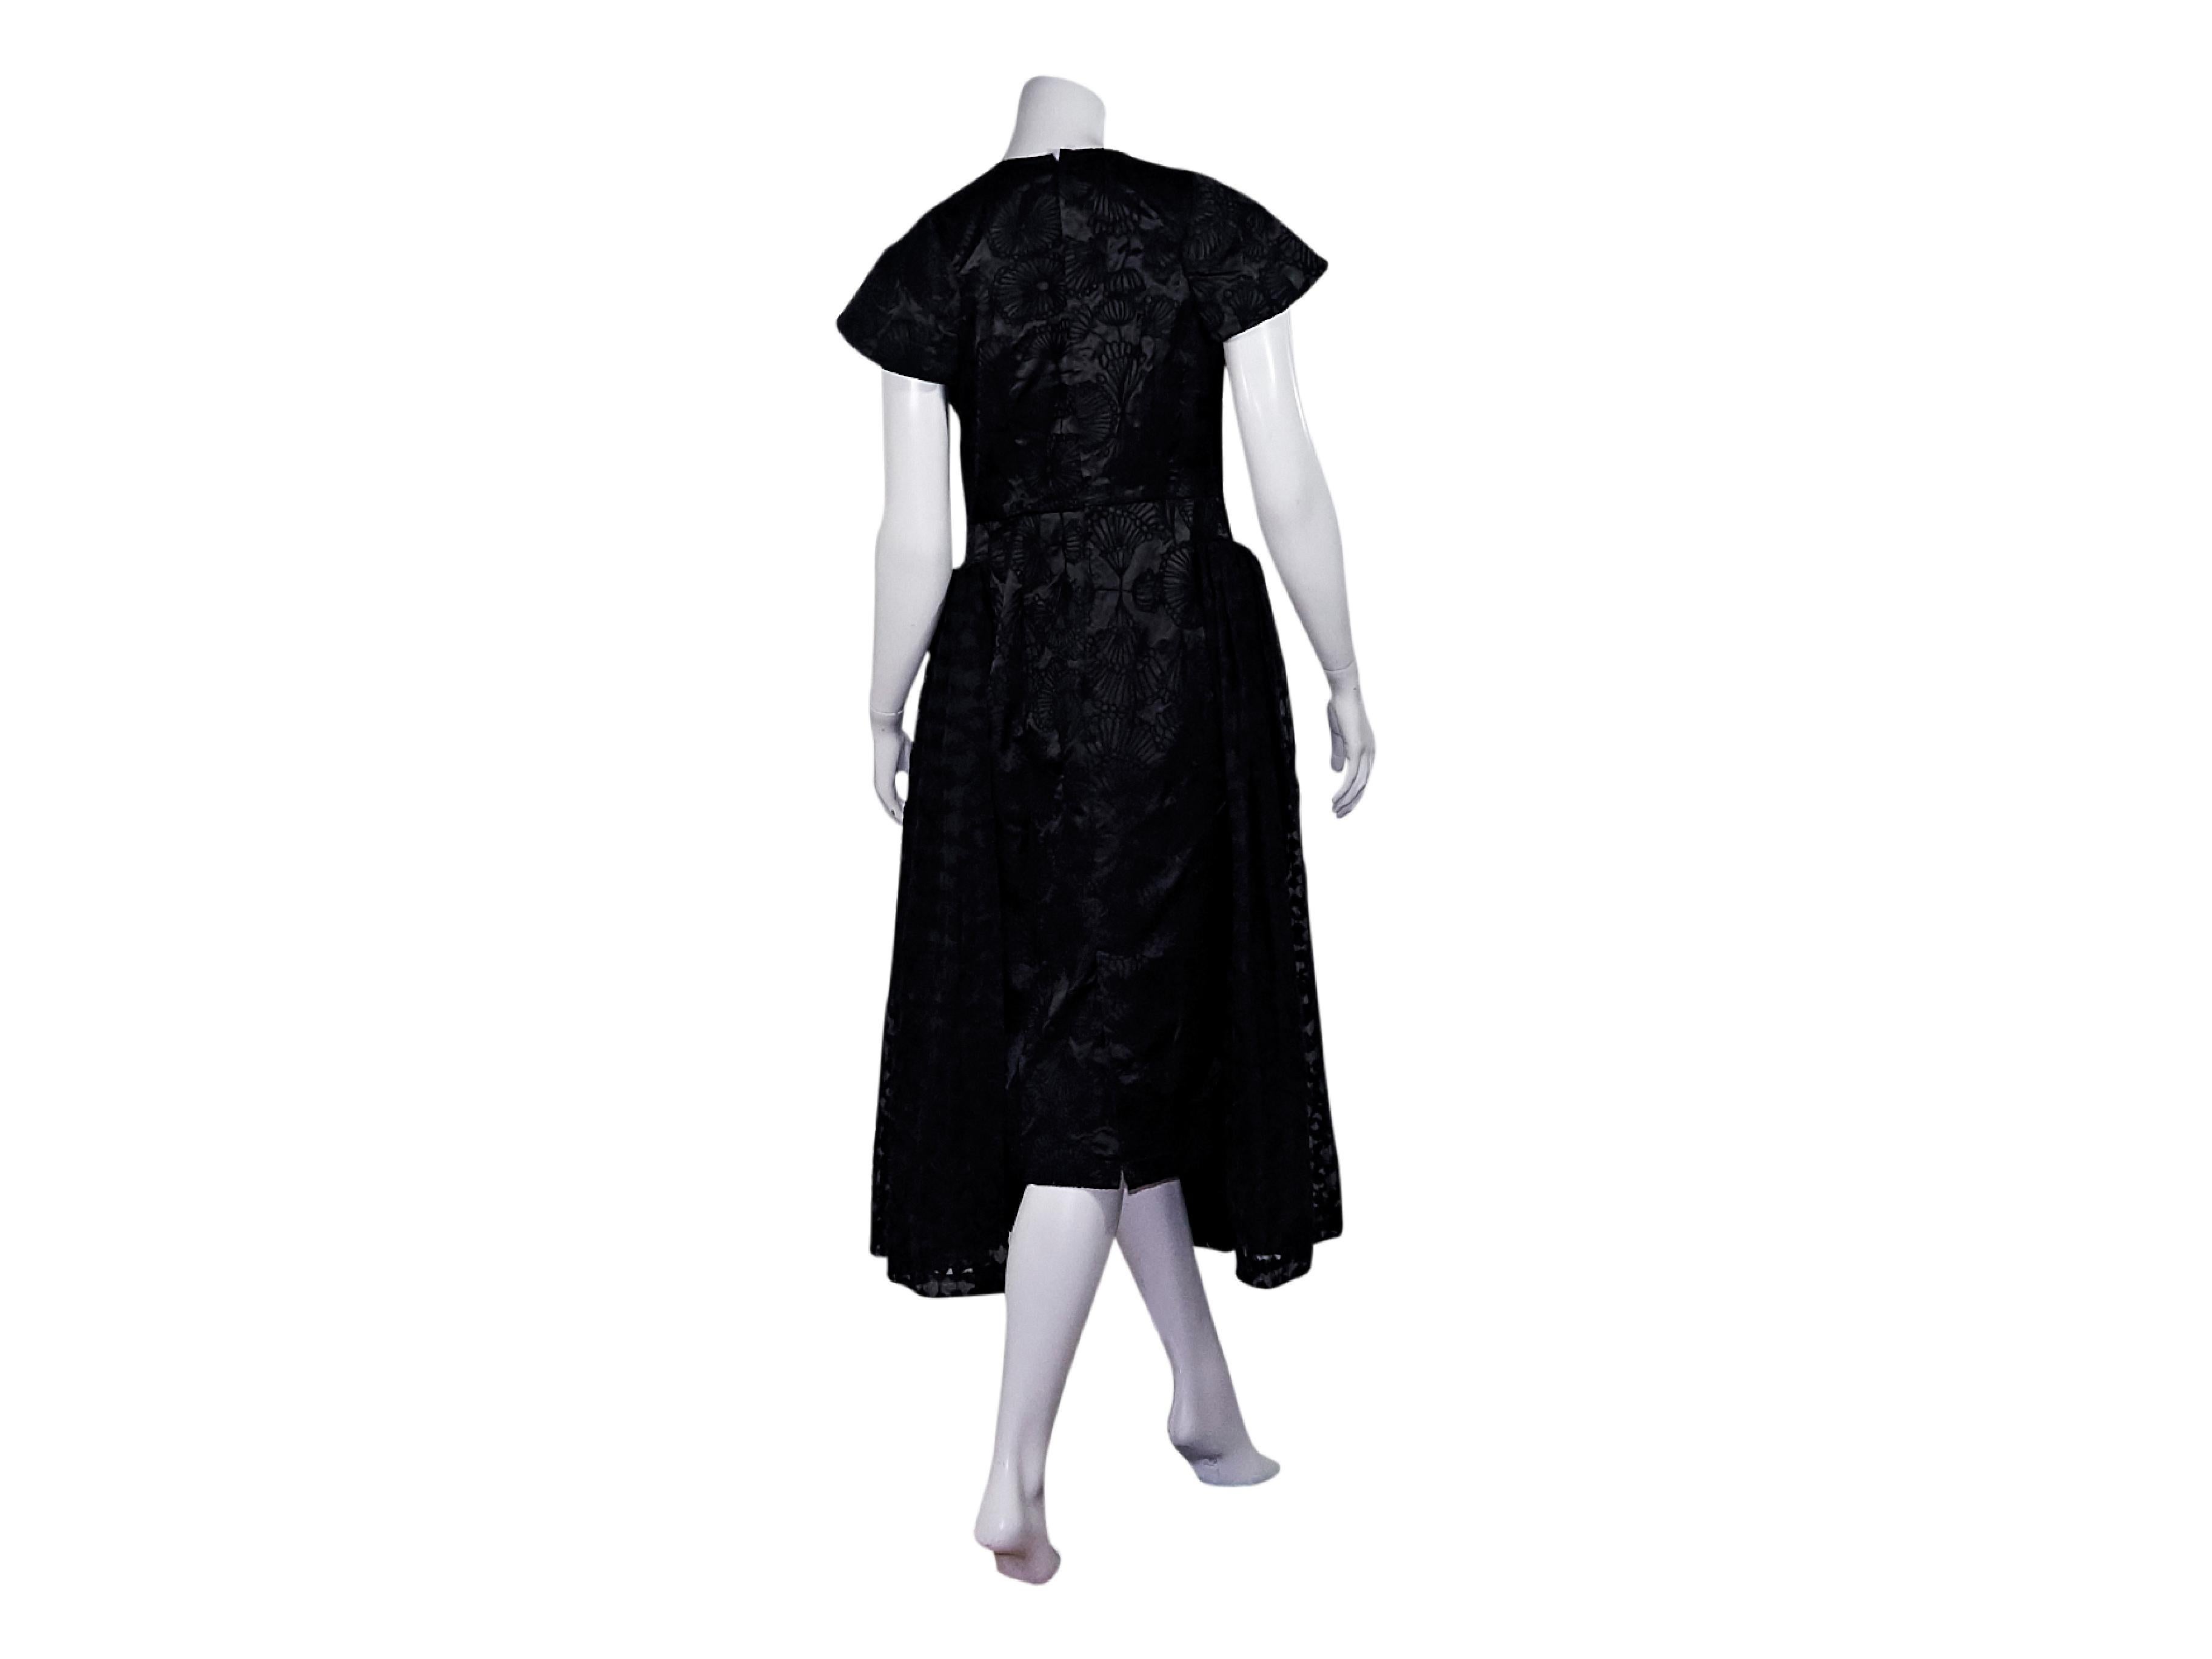 Product details:  Black embroidered evening dress by Comme des Garcons.  Crewneck.  Short dolman sleeves.  Concealed back zip closure.  Pleated skirting.  35